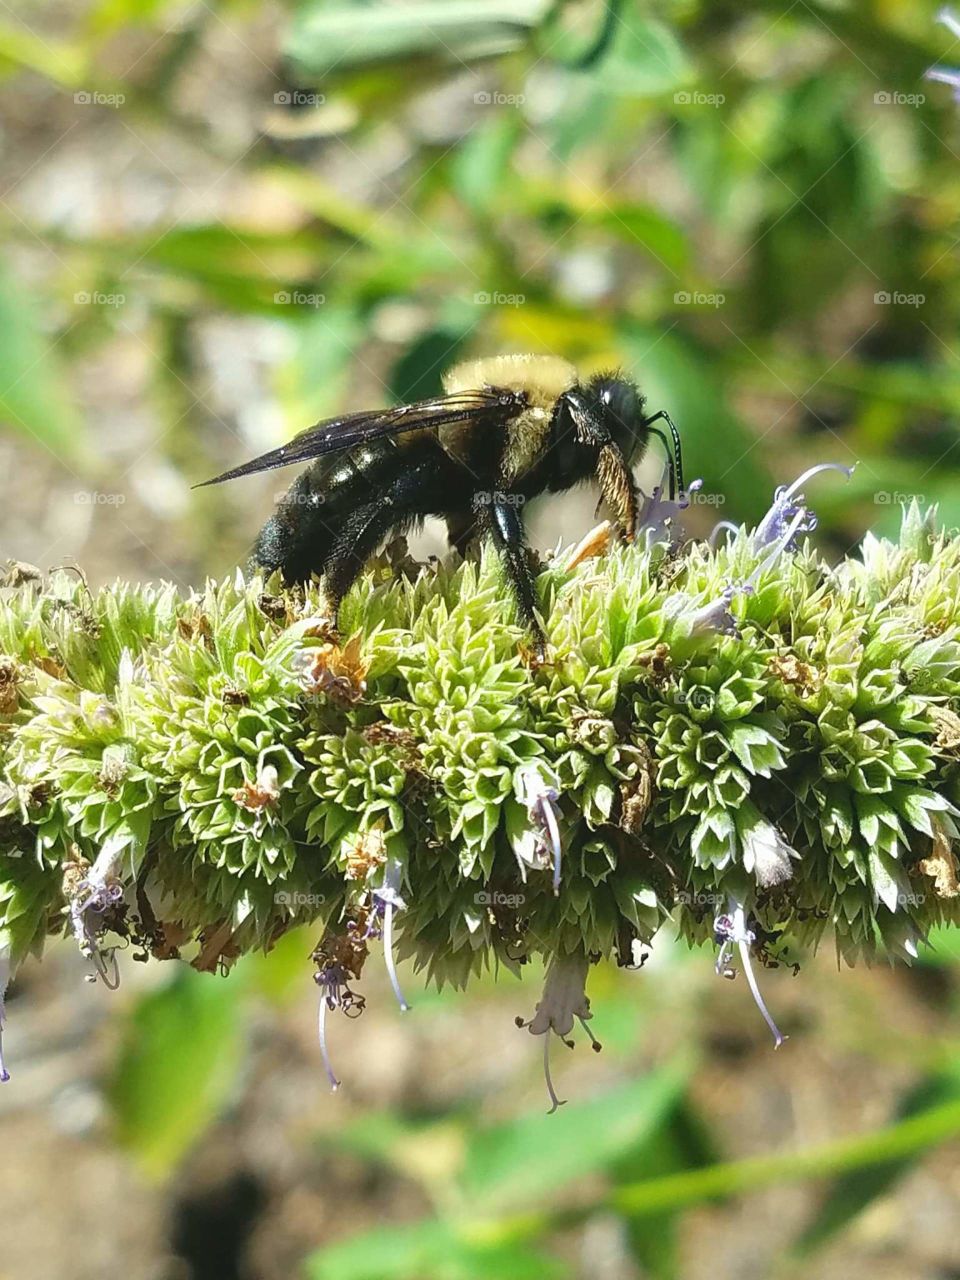 black and yellow bumblebee gathering pollen from a flower